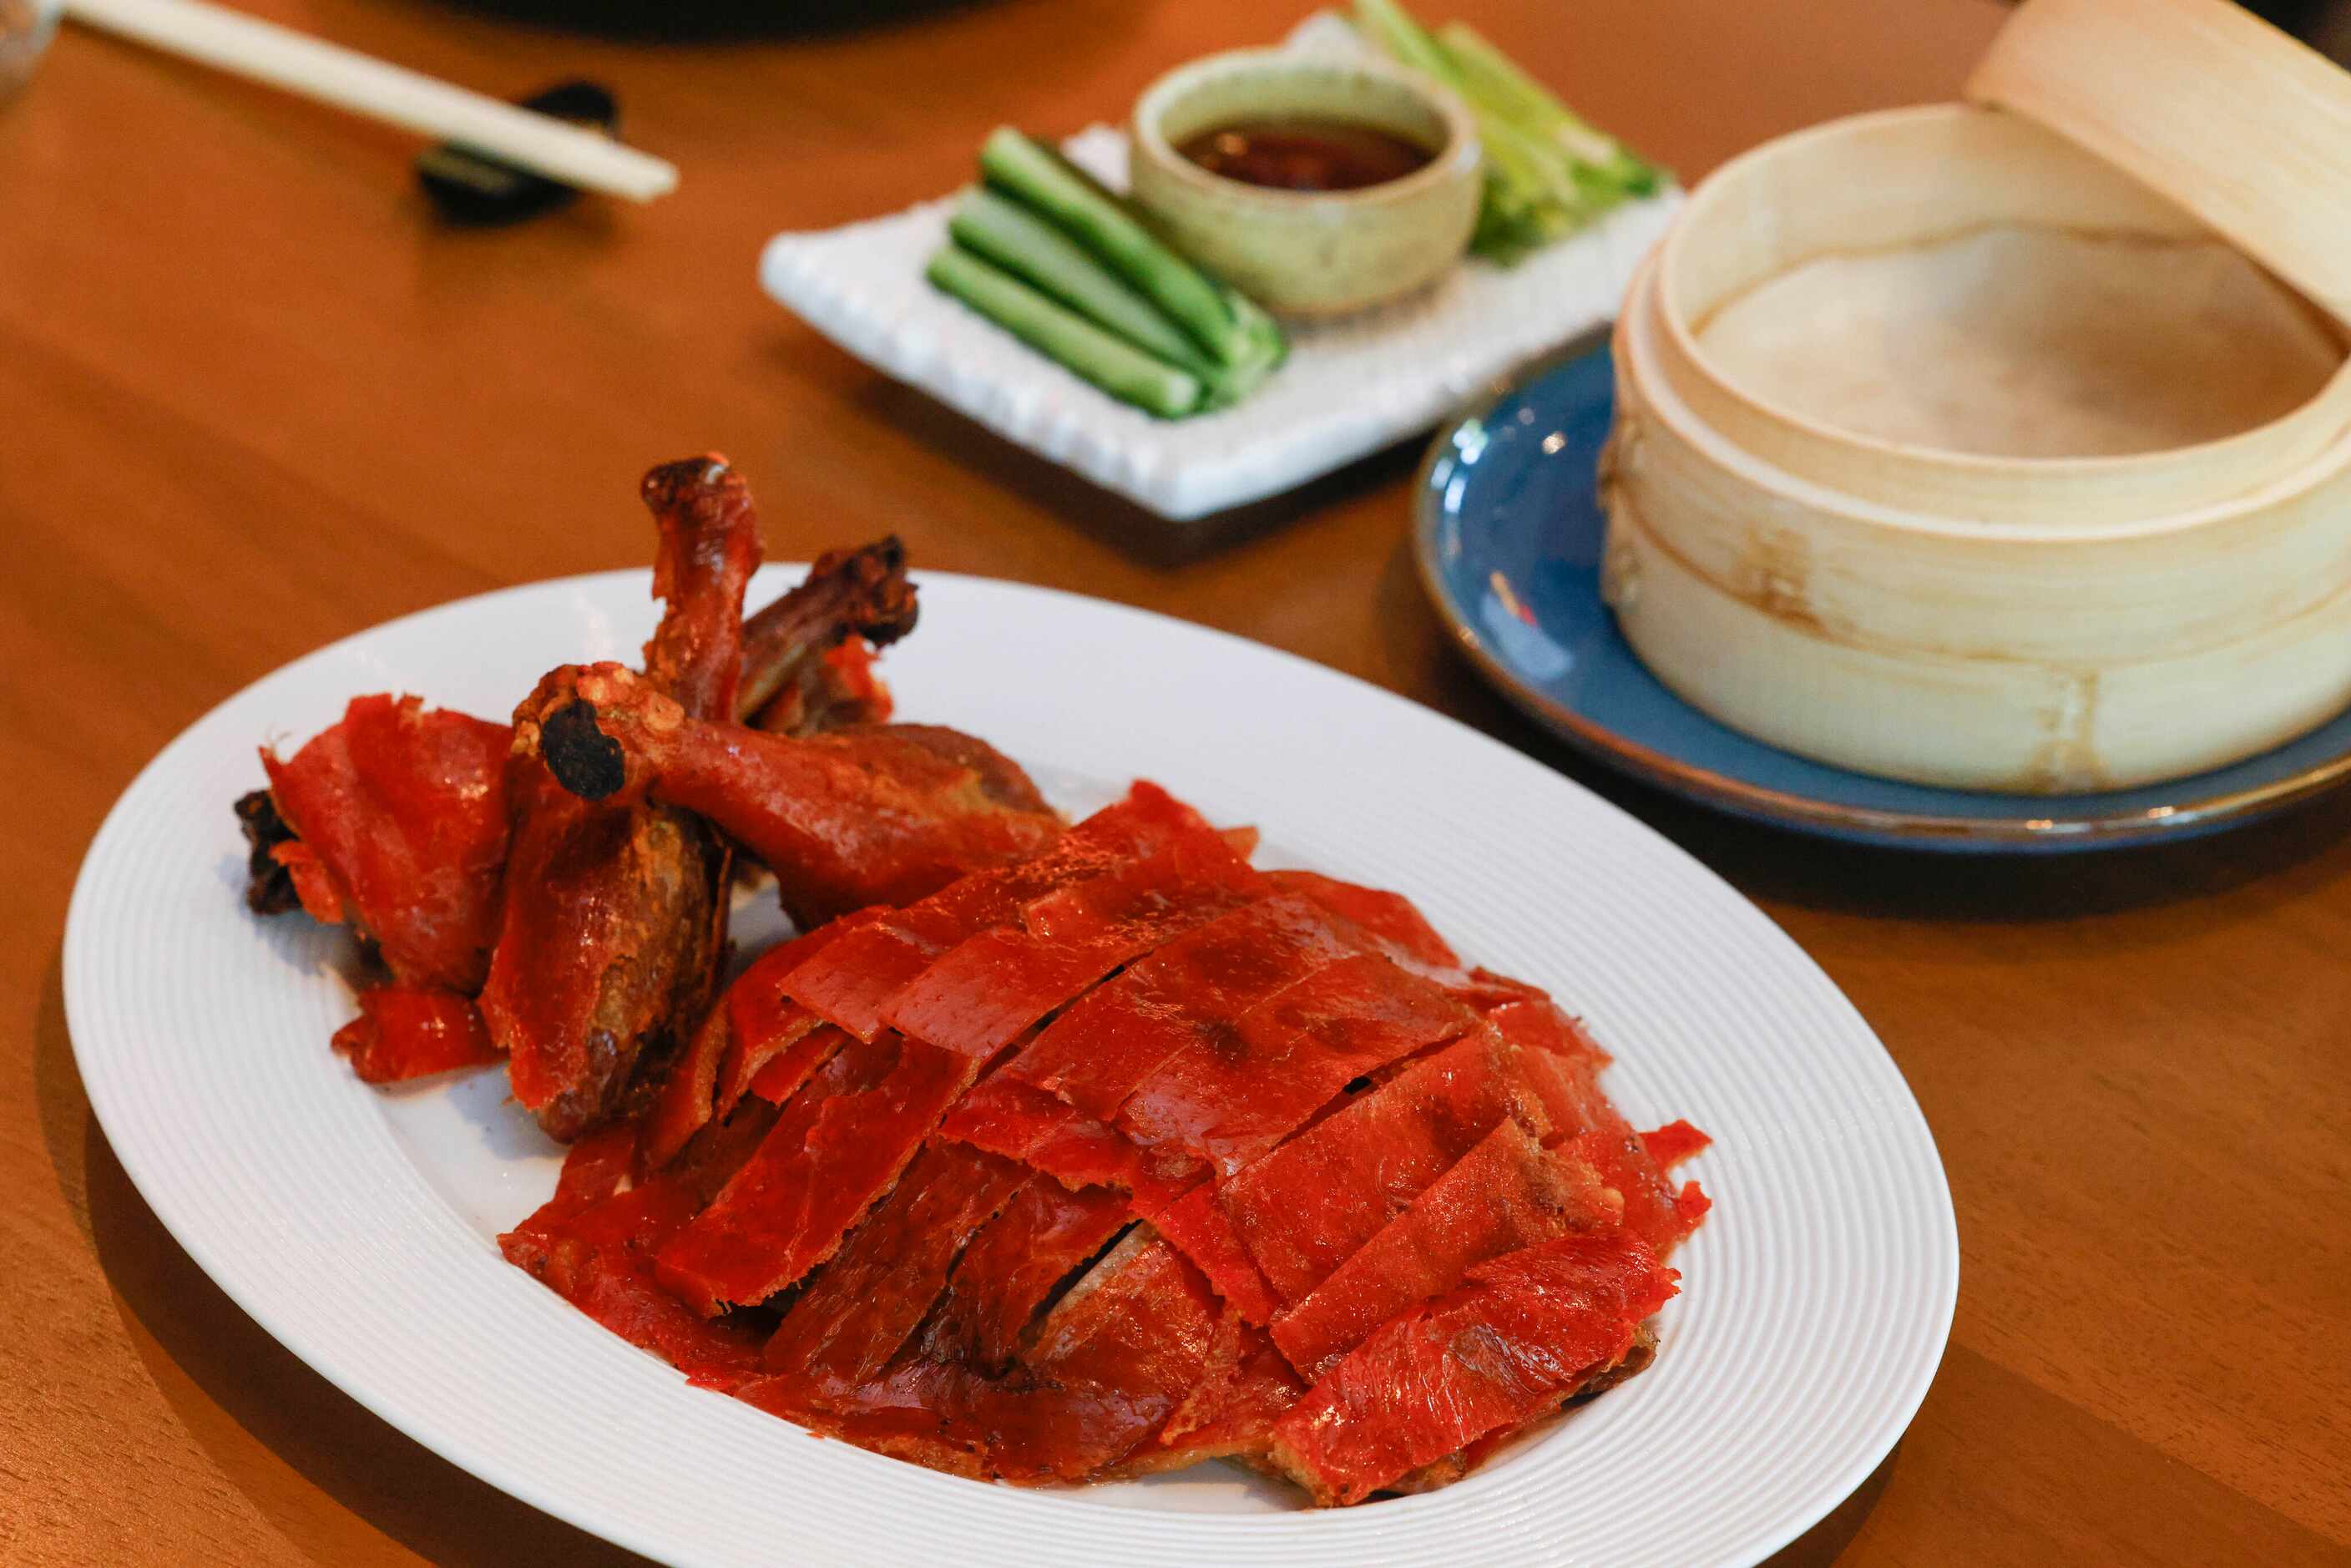 Peking duck, meant to be shared, is one of the signature dishes at Komodo.